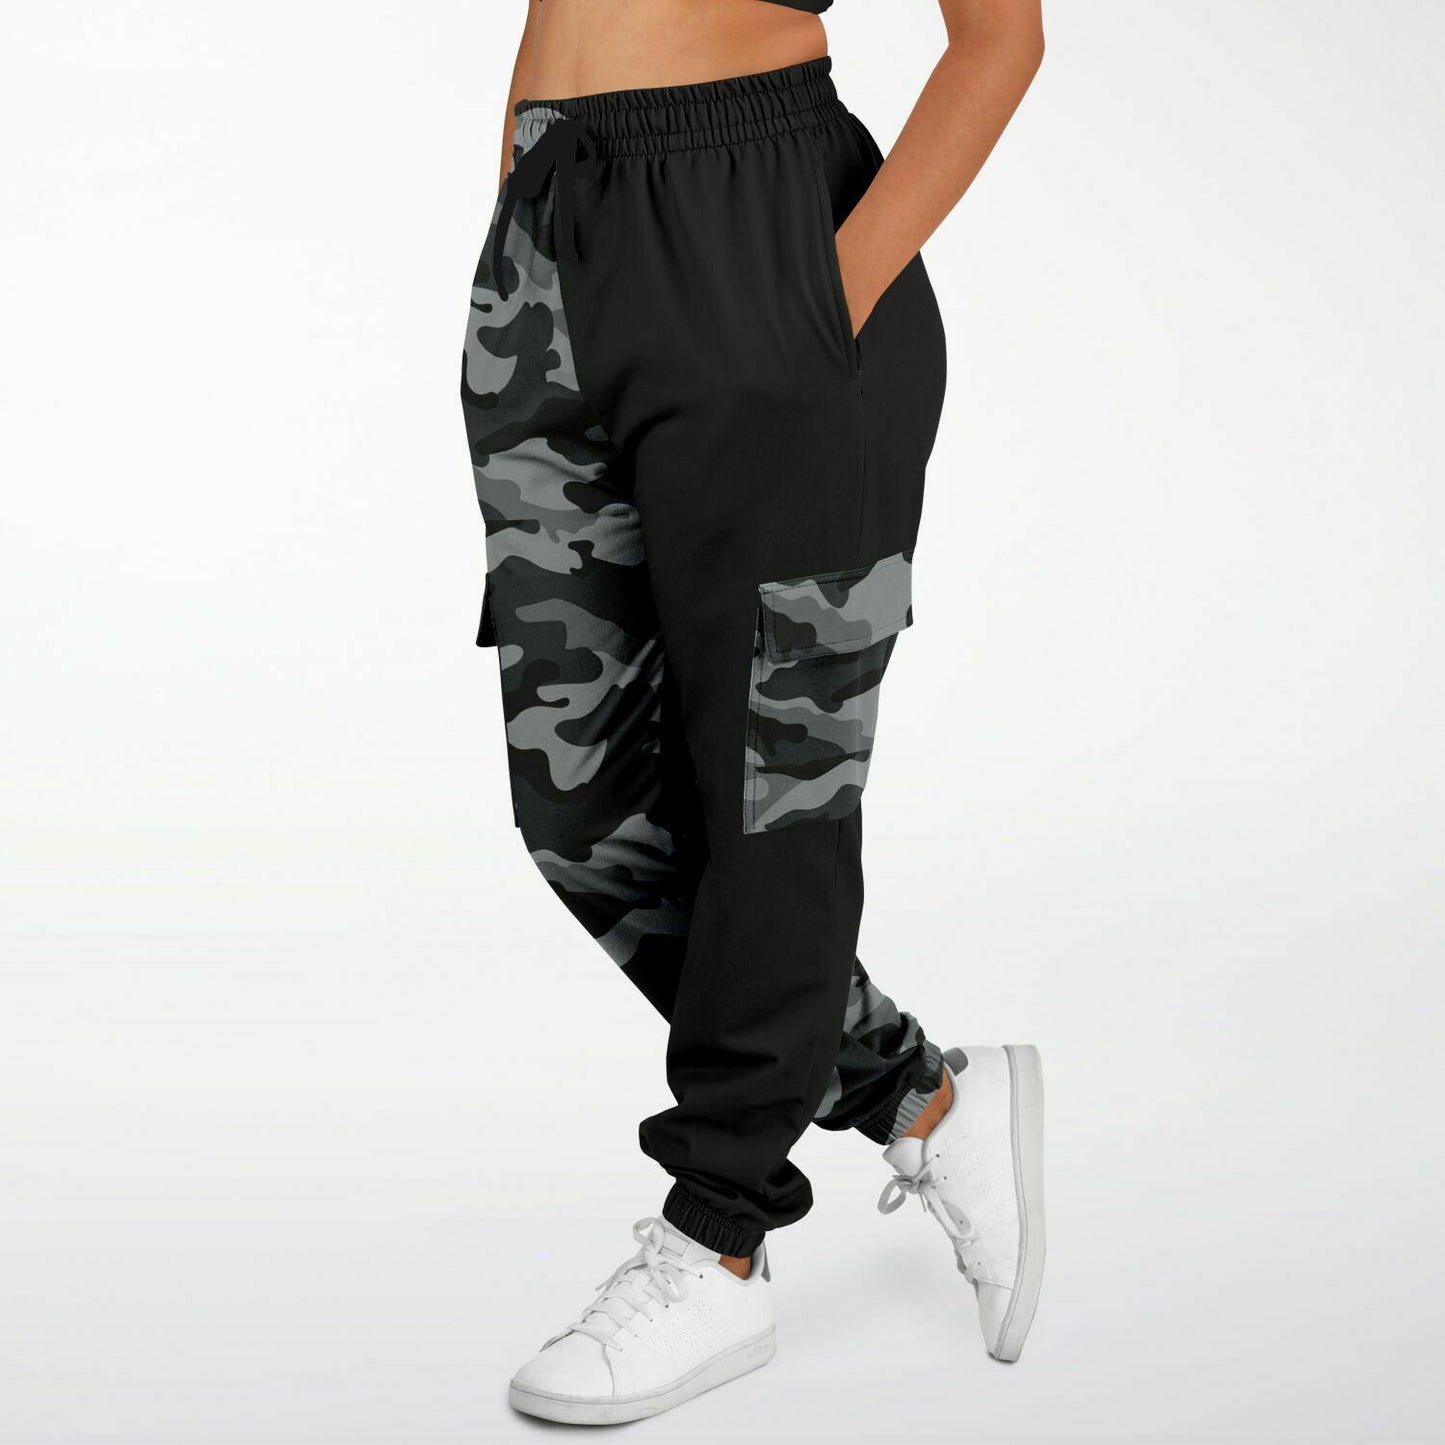 (A) Gray Camouflage Two Tone Sweatpants